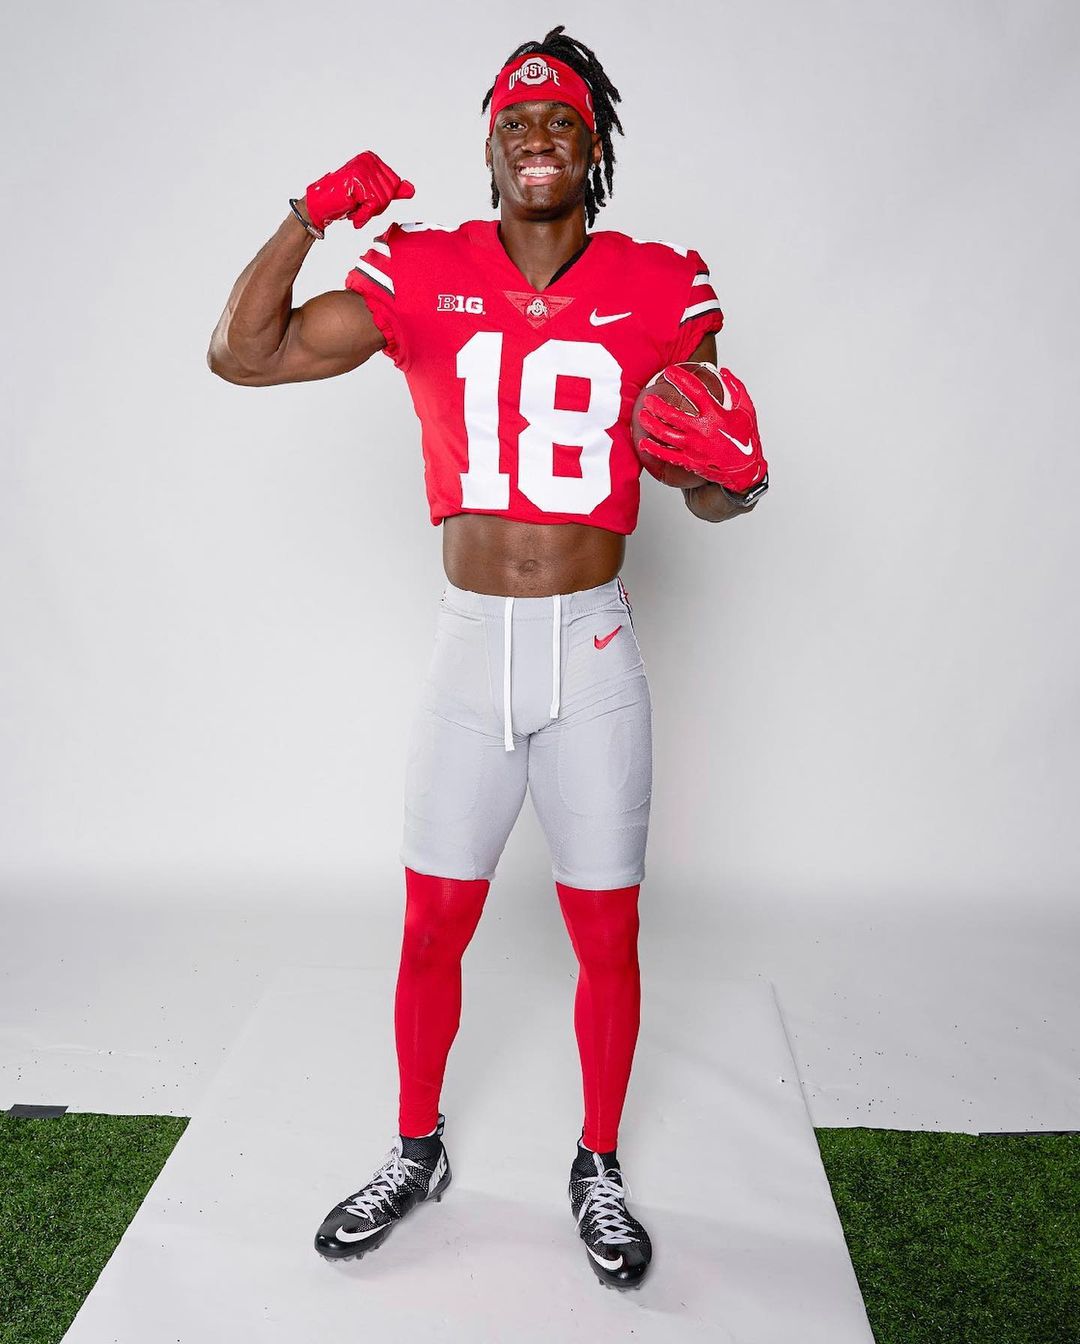 Ohio State's Wide Receiver Marvin Harrison Jr.